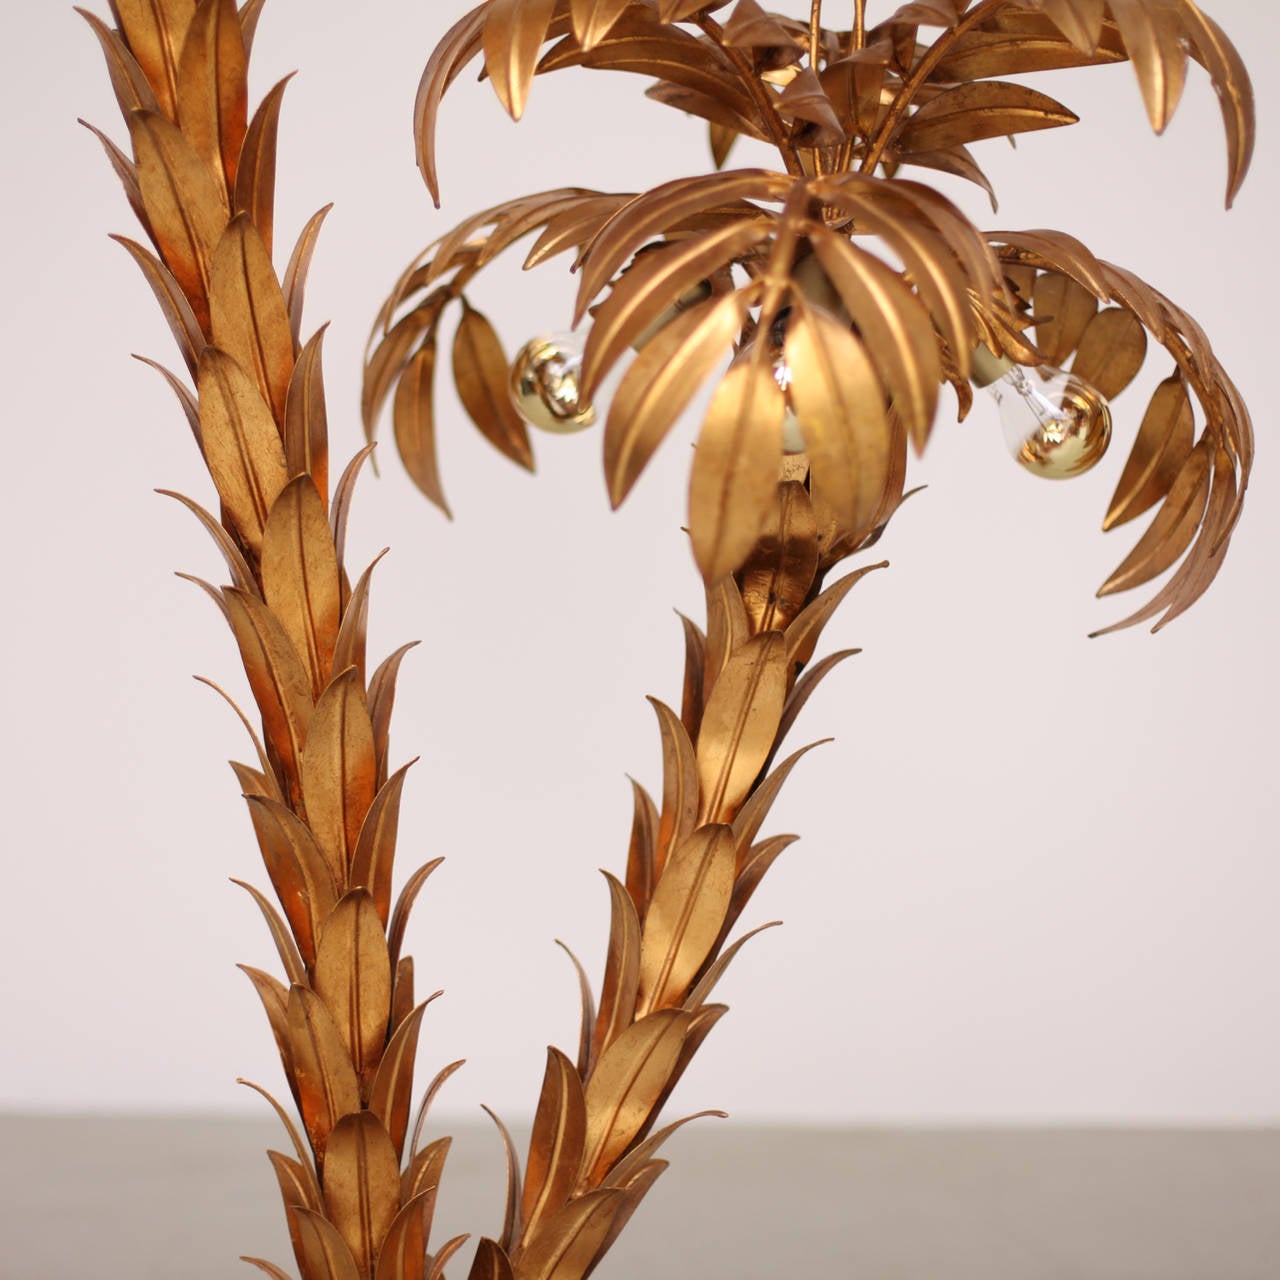 Huge and rare two trunk palm tree floor lamp fro the 1970s of the German designer Hans Kögl. The lamp is made of gold-plated metal and cast significant light shadows for a phantastic atmosphere. 6 x E27.
To be on the the safe side, the lamp should